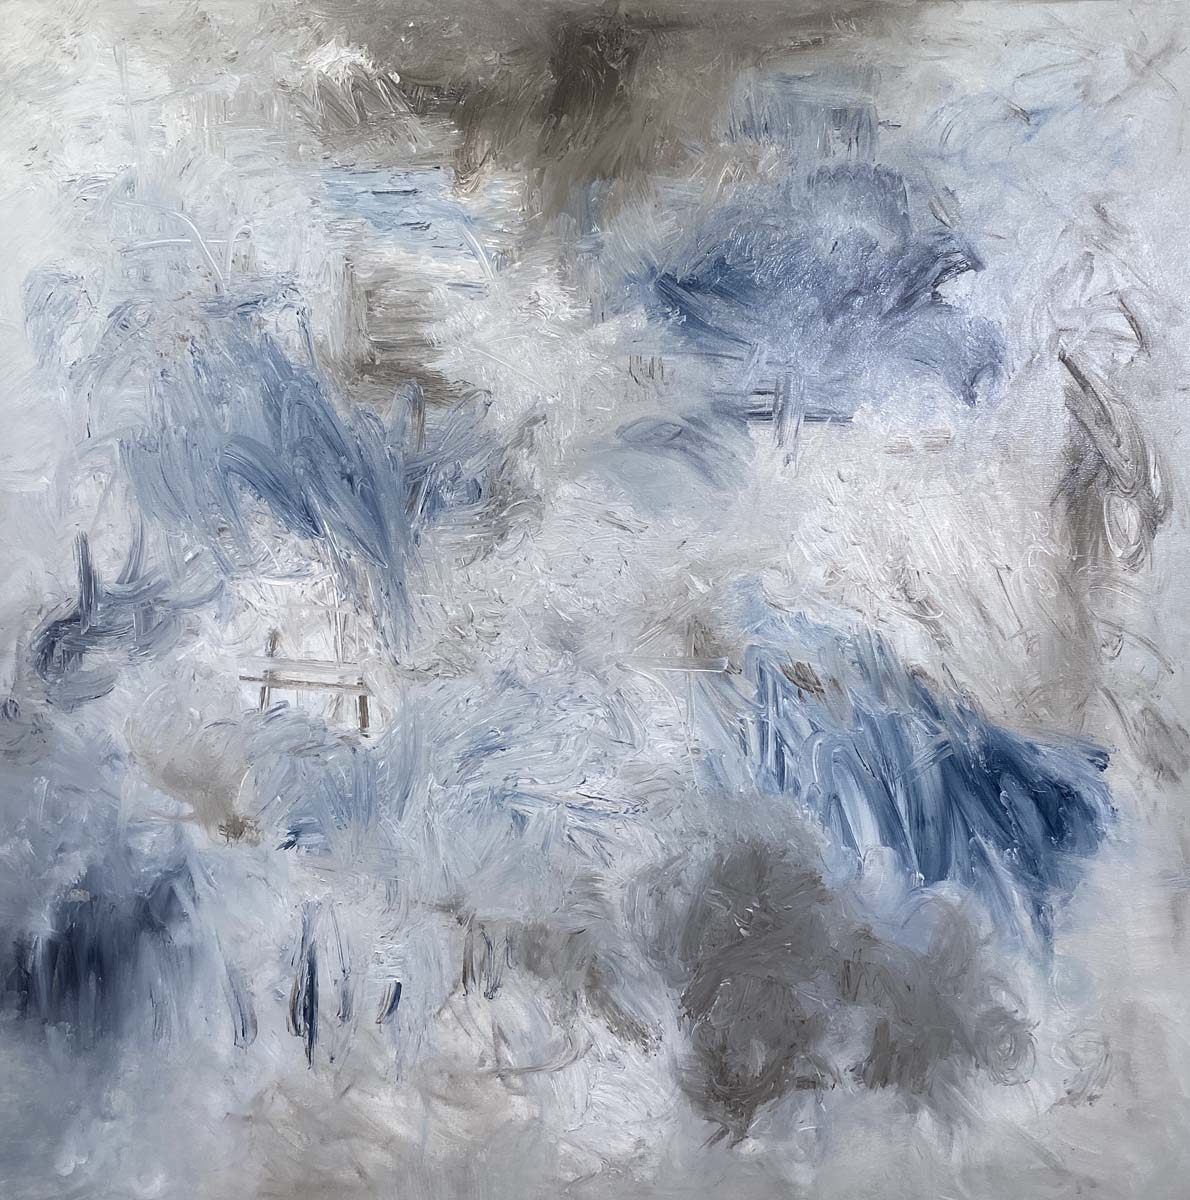 Whispering Winds, Oil Abstract by Red, gallery wrap canvas, 48x48